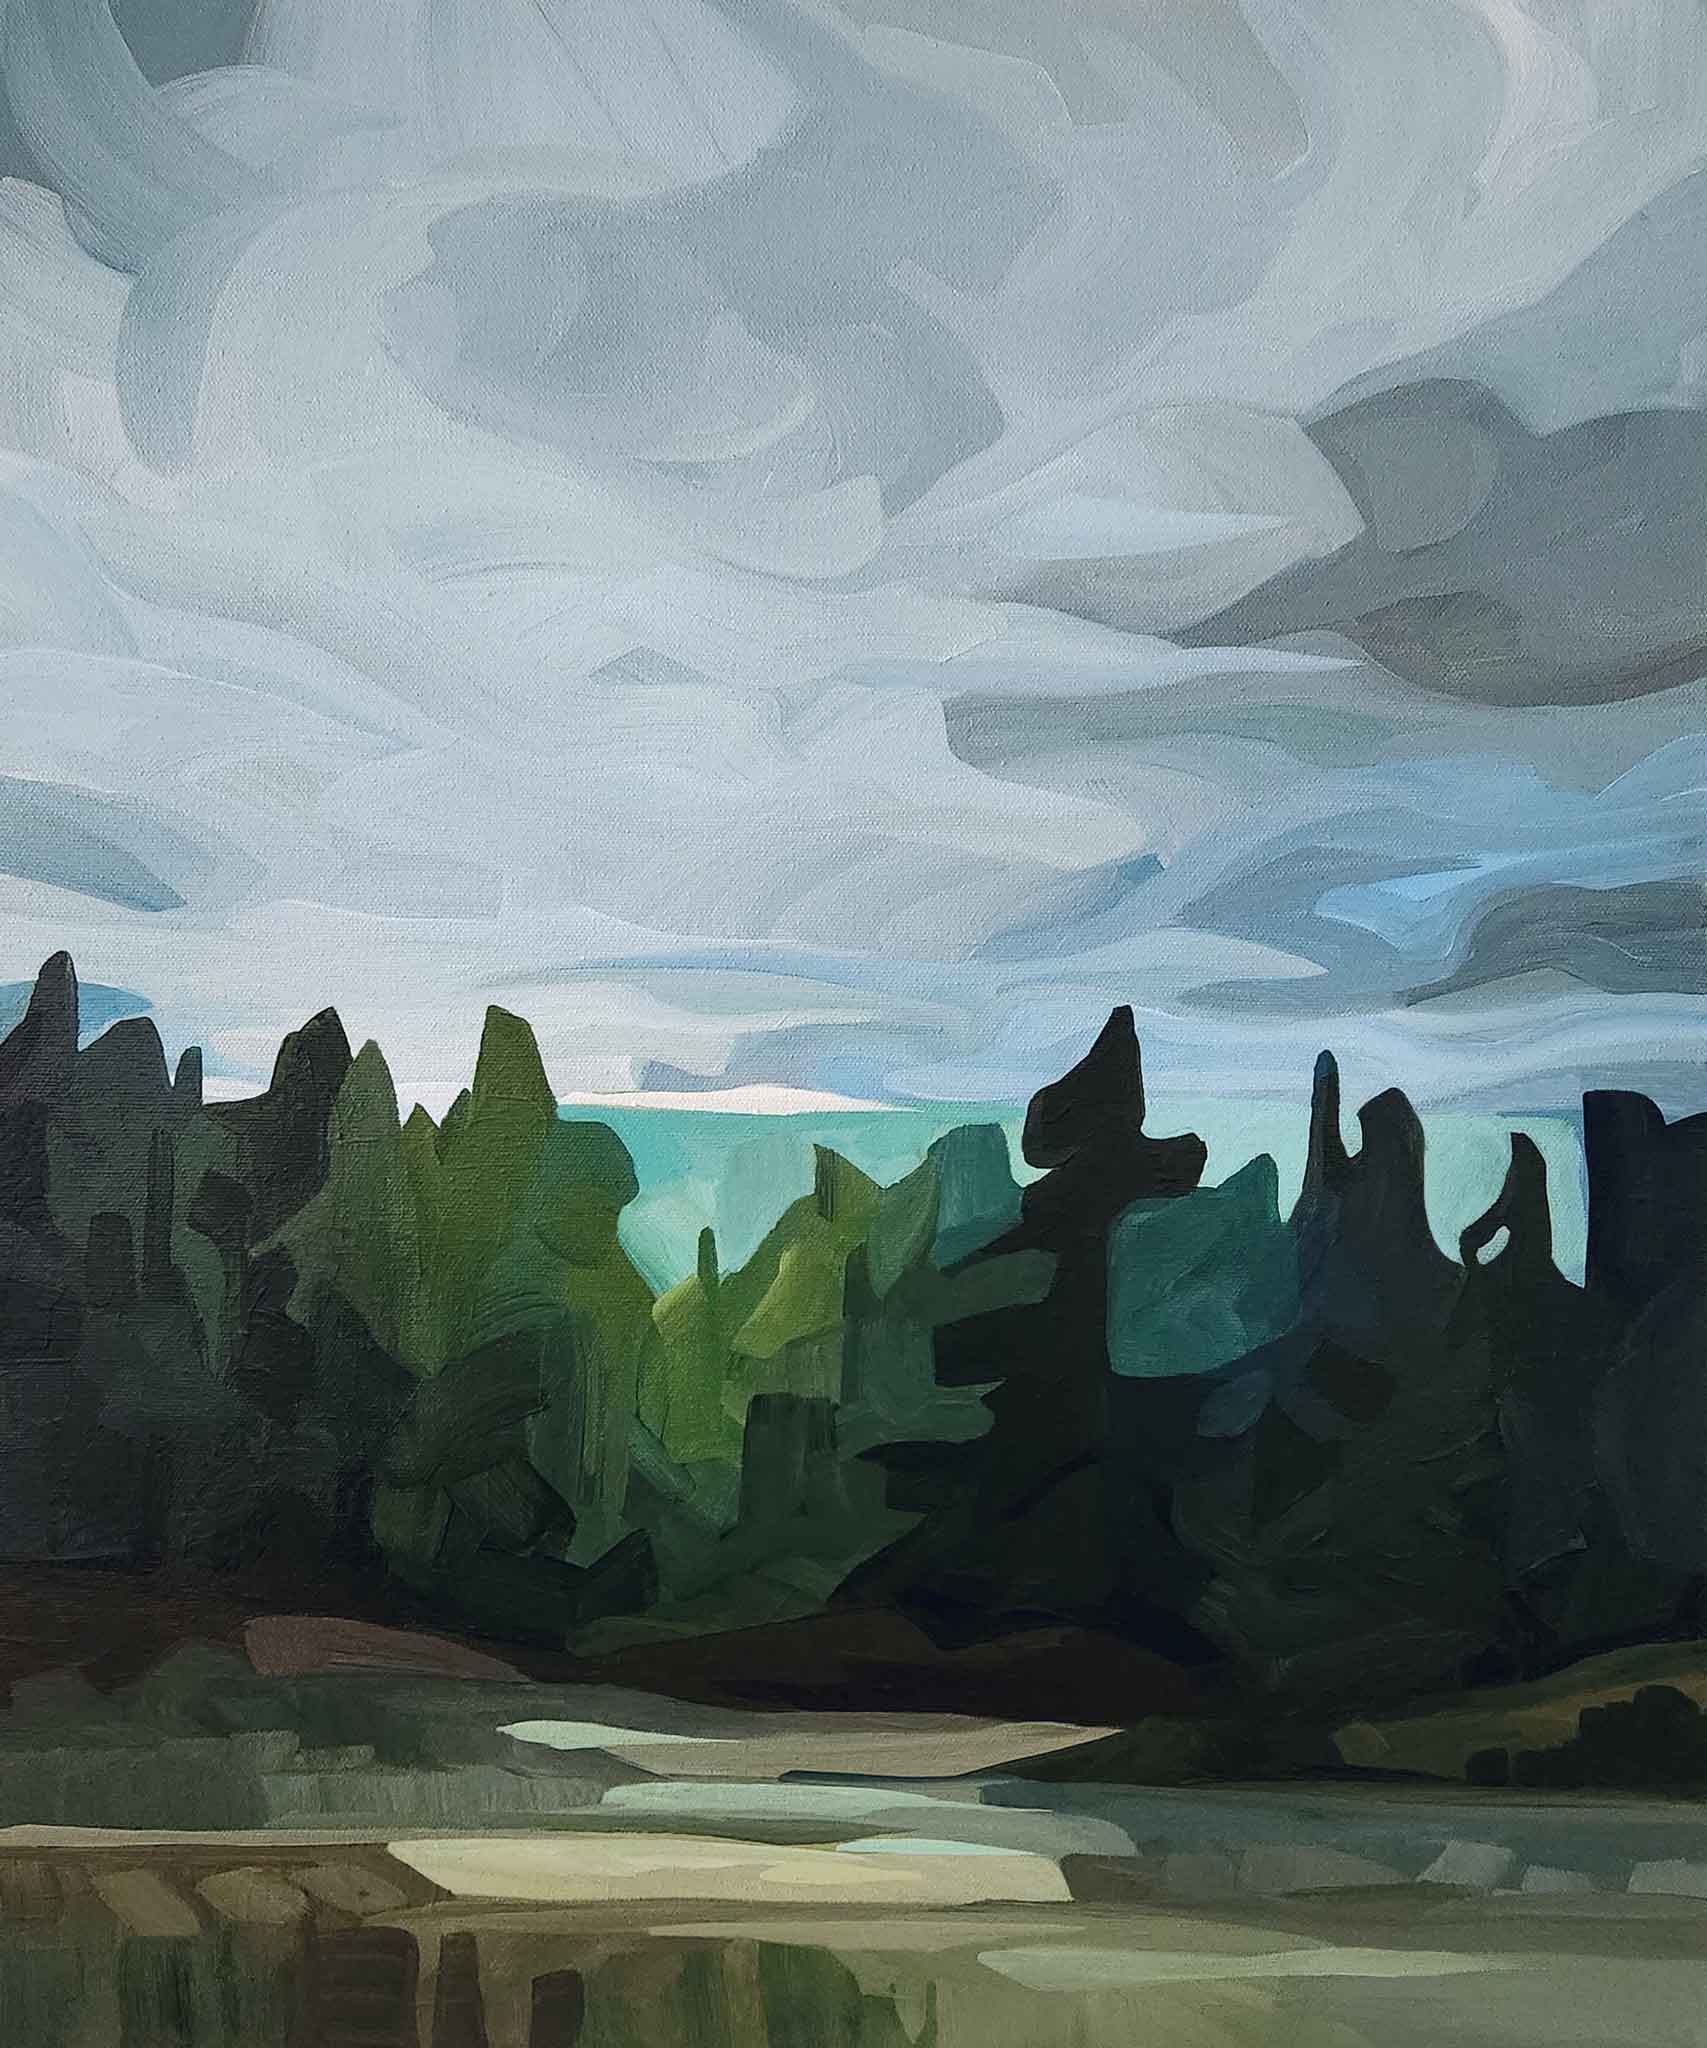 An acrylic landscape painting that portrays the forest, the sky and the wind in abstract form